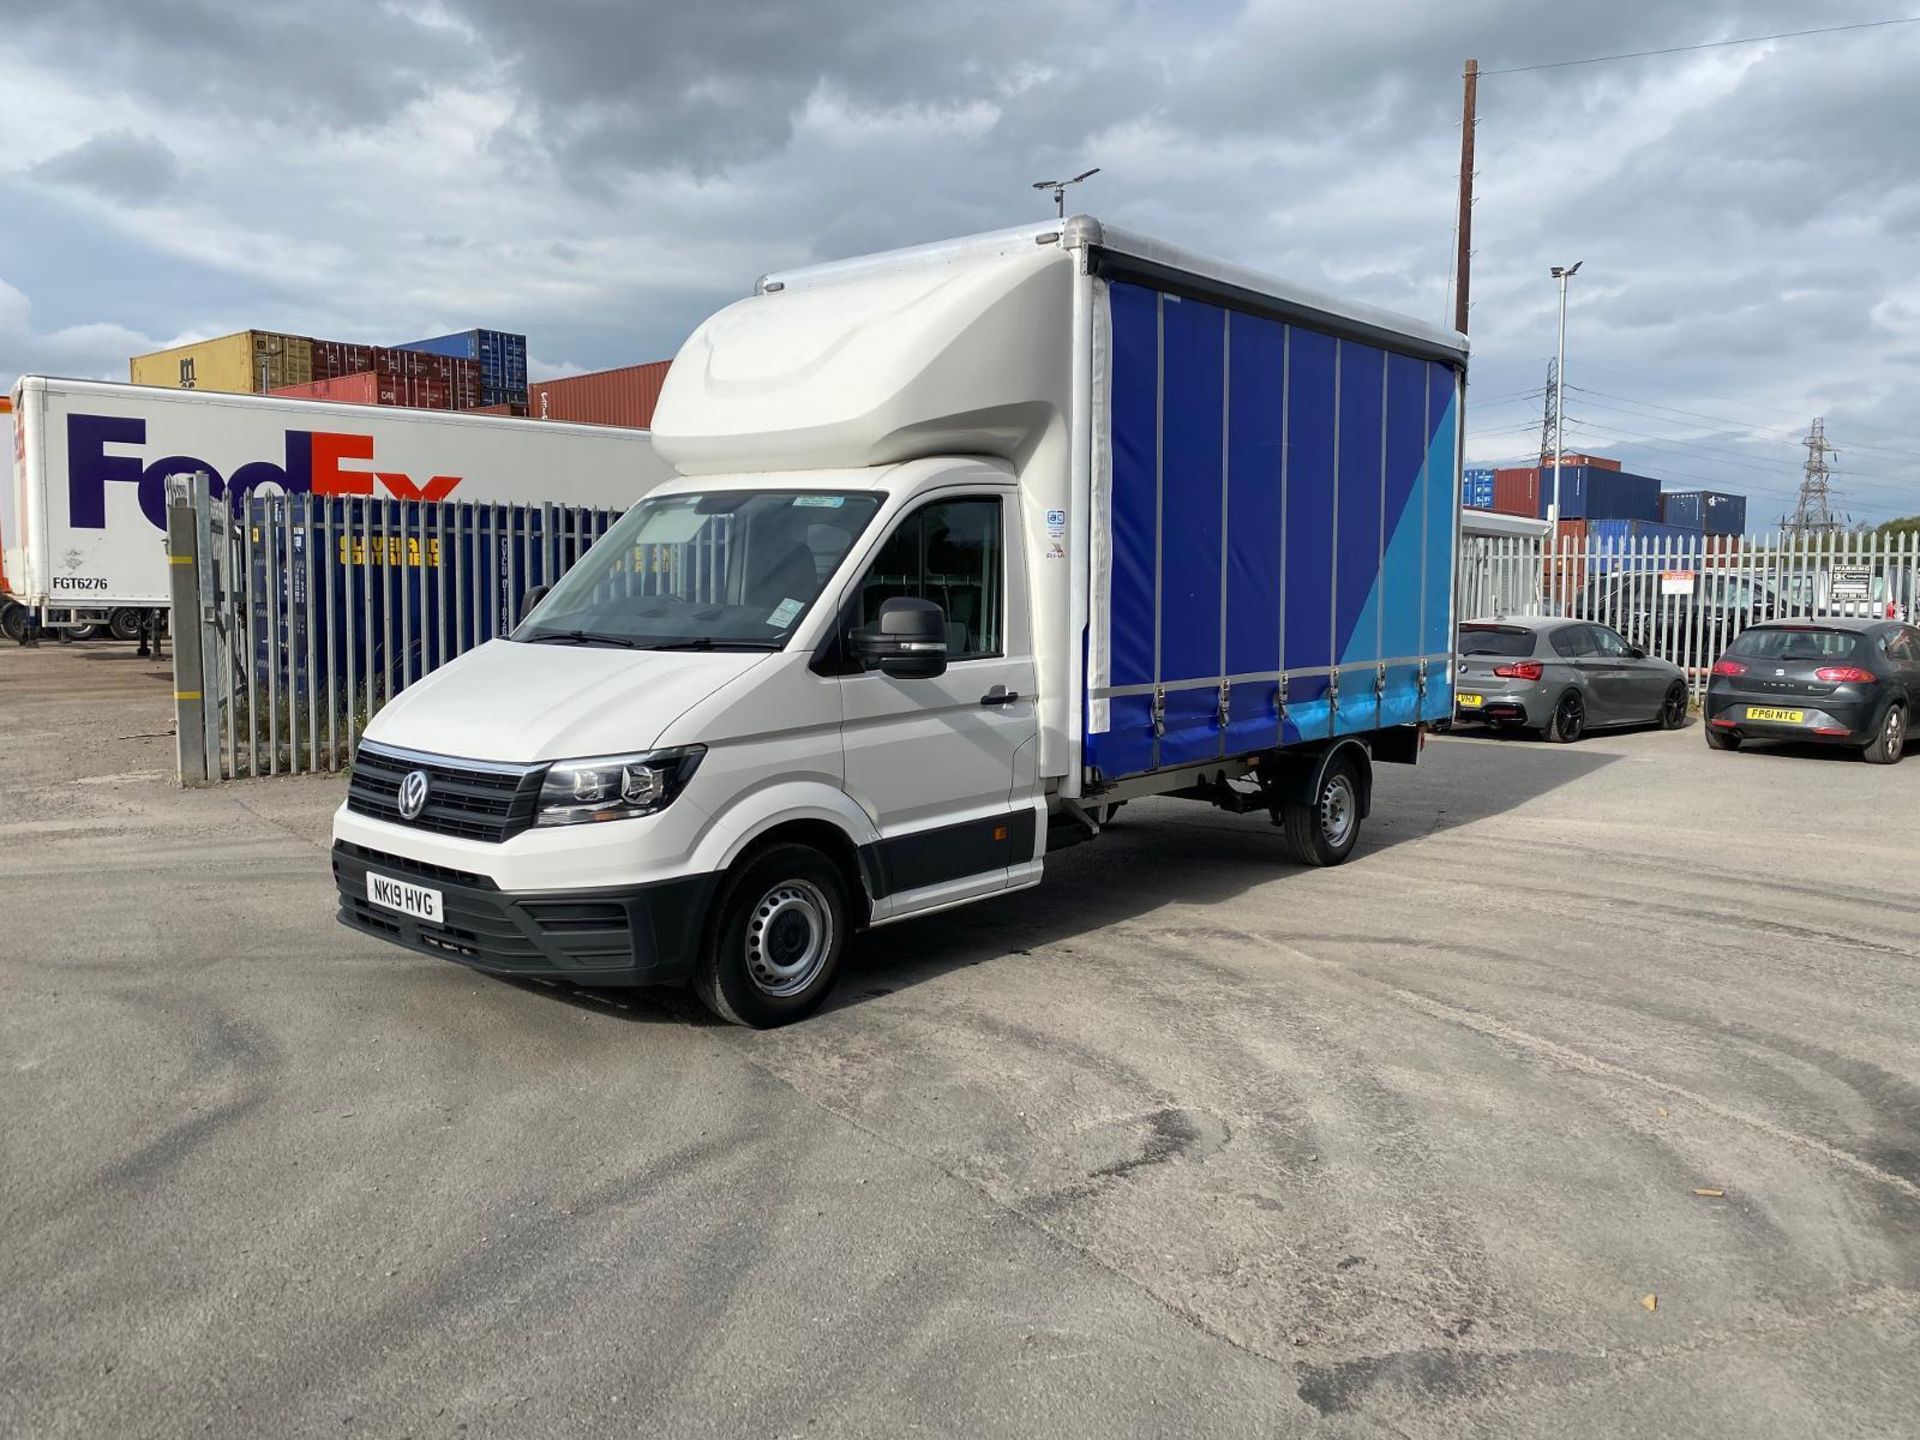 2019 VW CRAFTER 14FT CURTAIN SIDER: RELIABLE WORKHORSE - Image 3 of 12